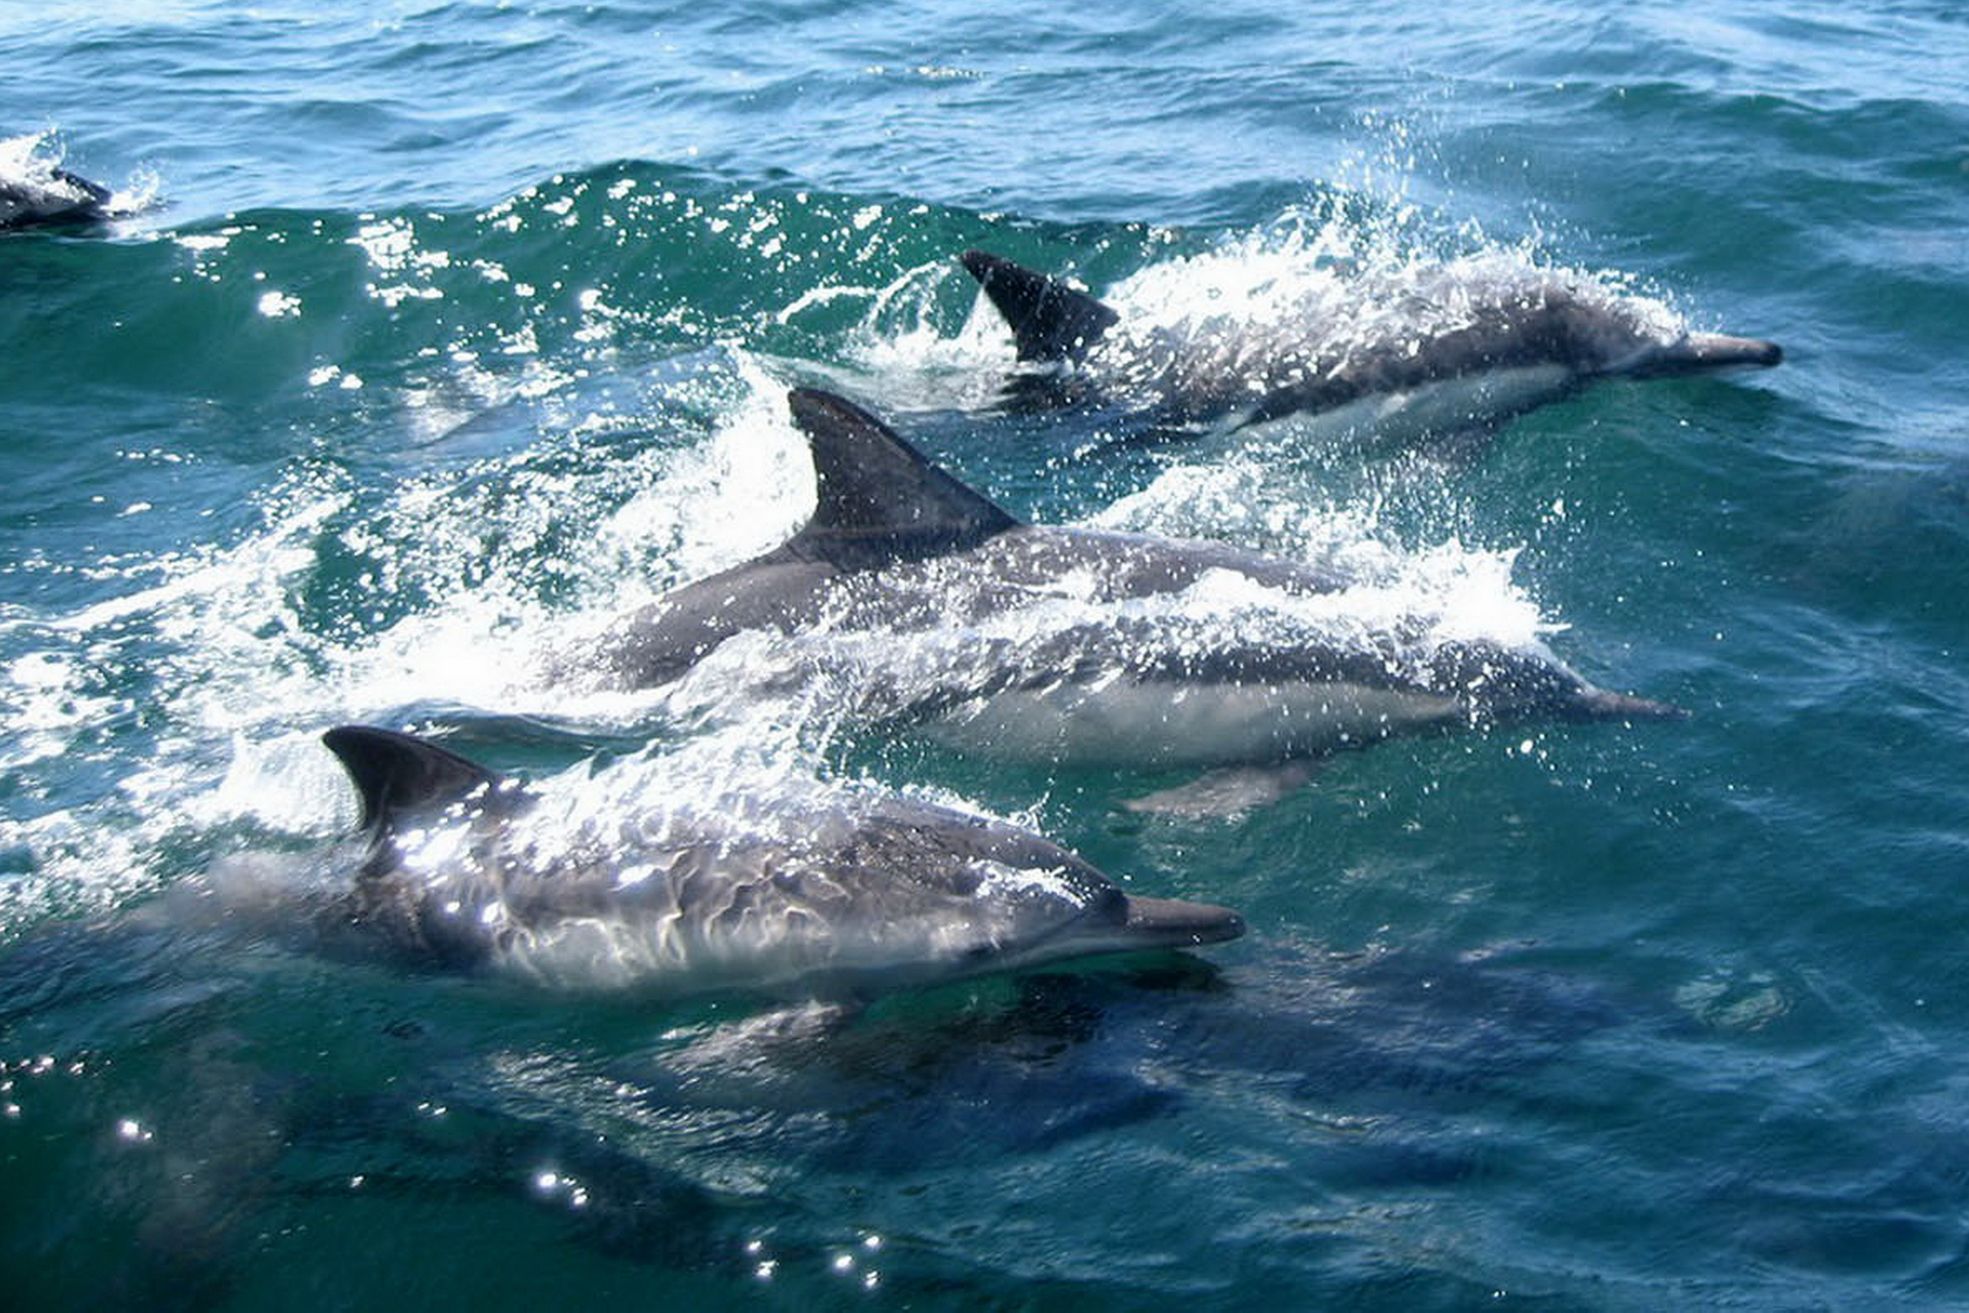 Spot Dolphins off Tybee Island